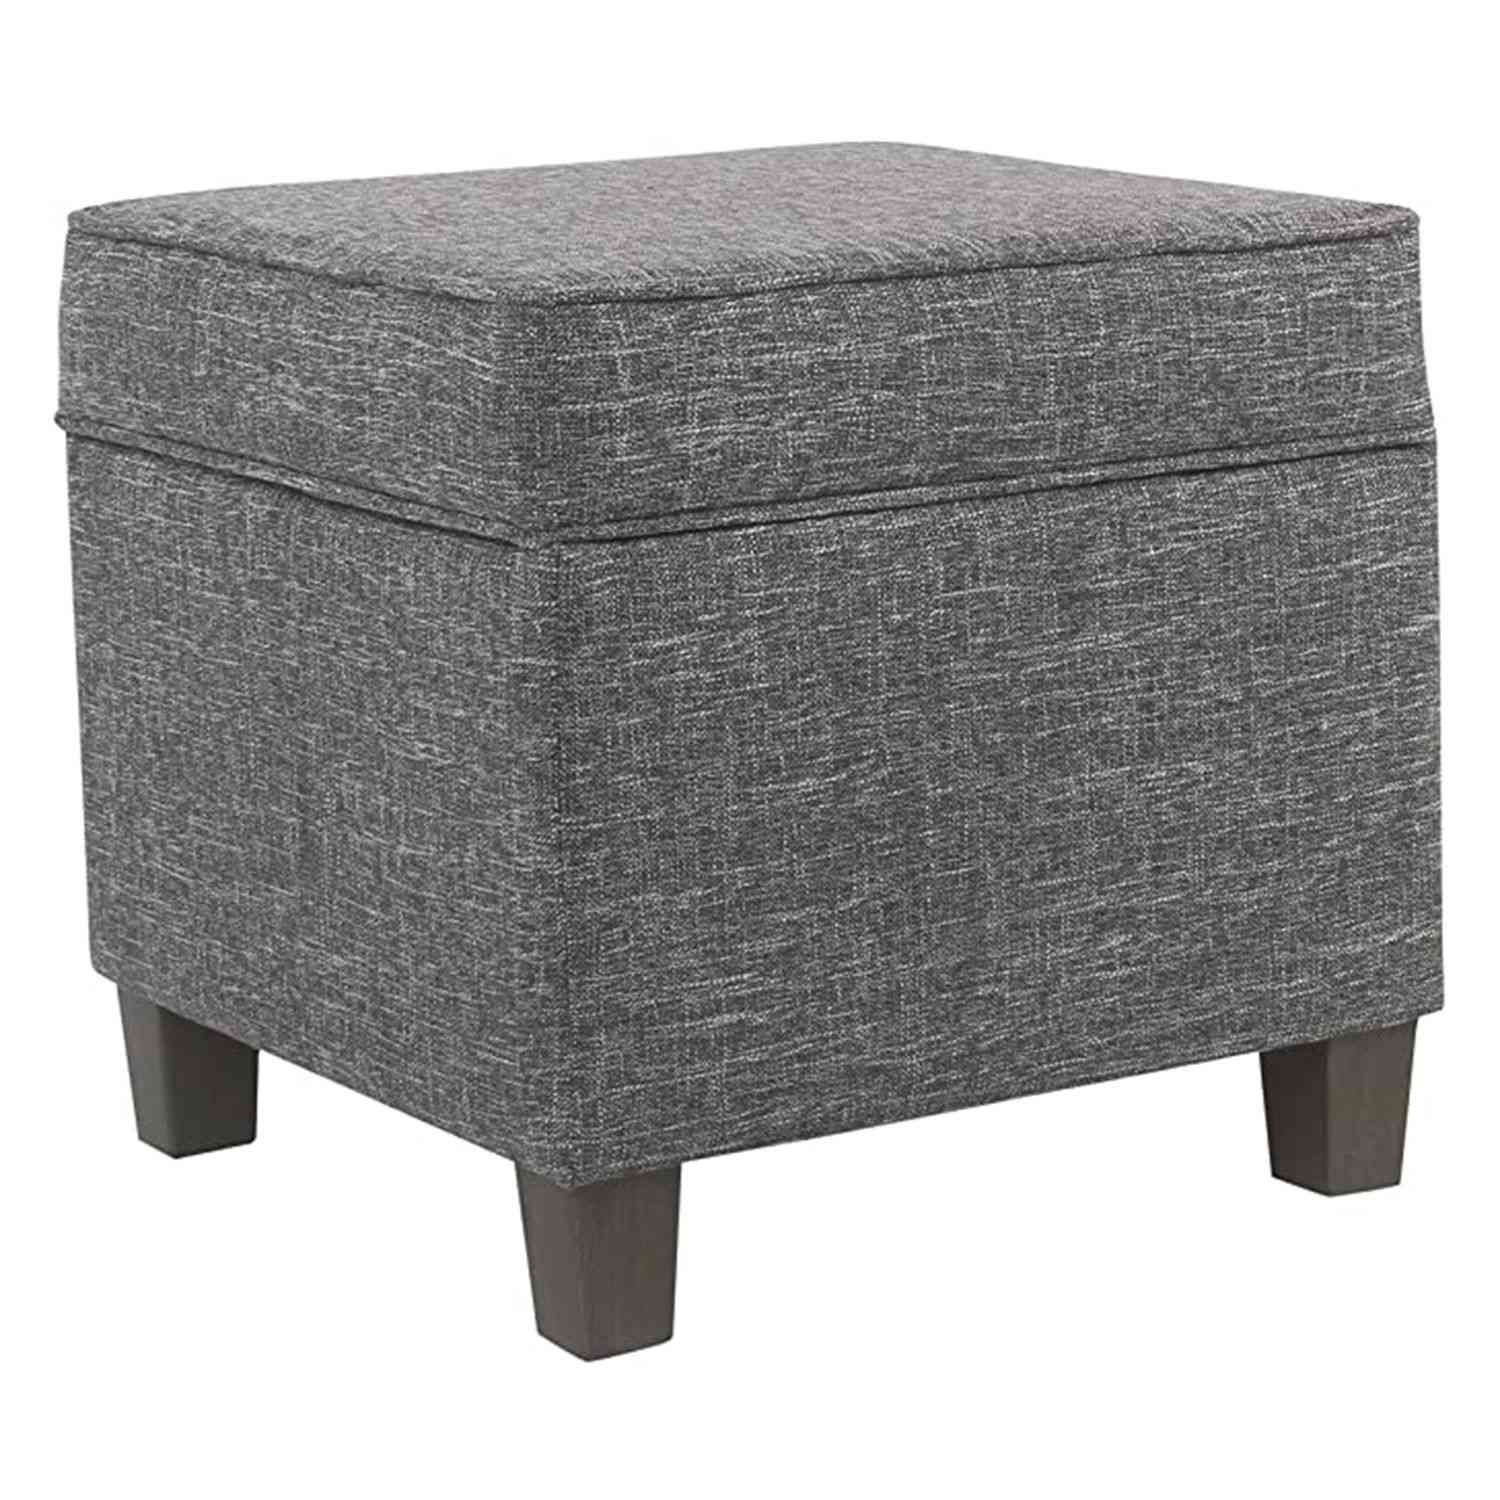 The 18 Best Storage Ottomans For Every Style In 2023 For 24 Inch Ottomans (View 14 of 15)